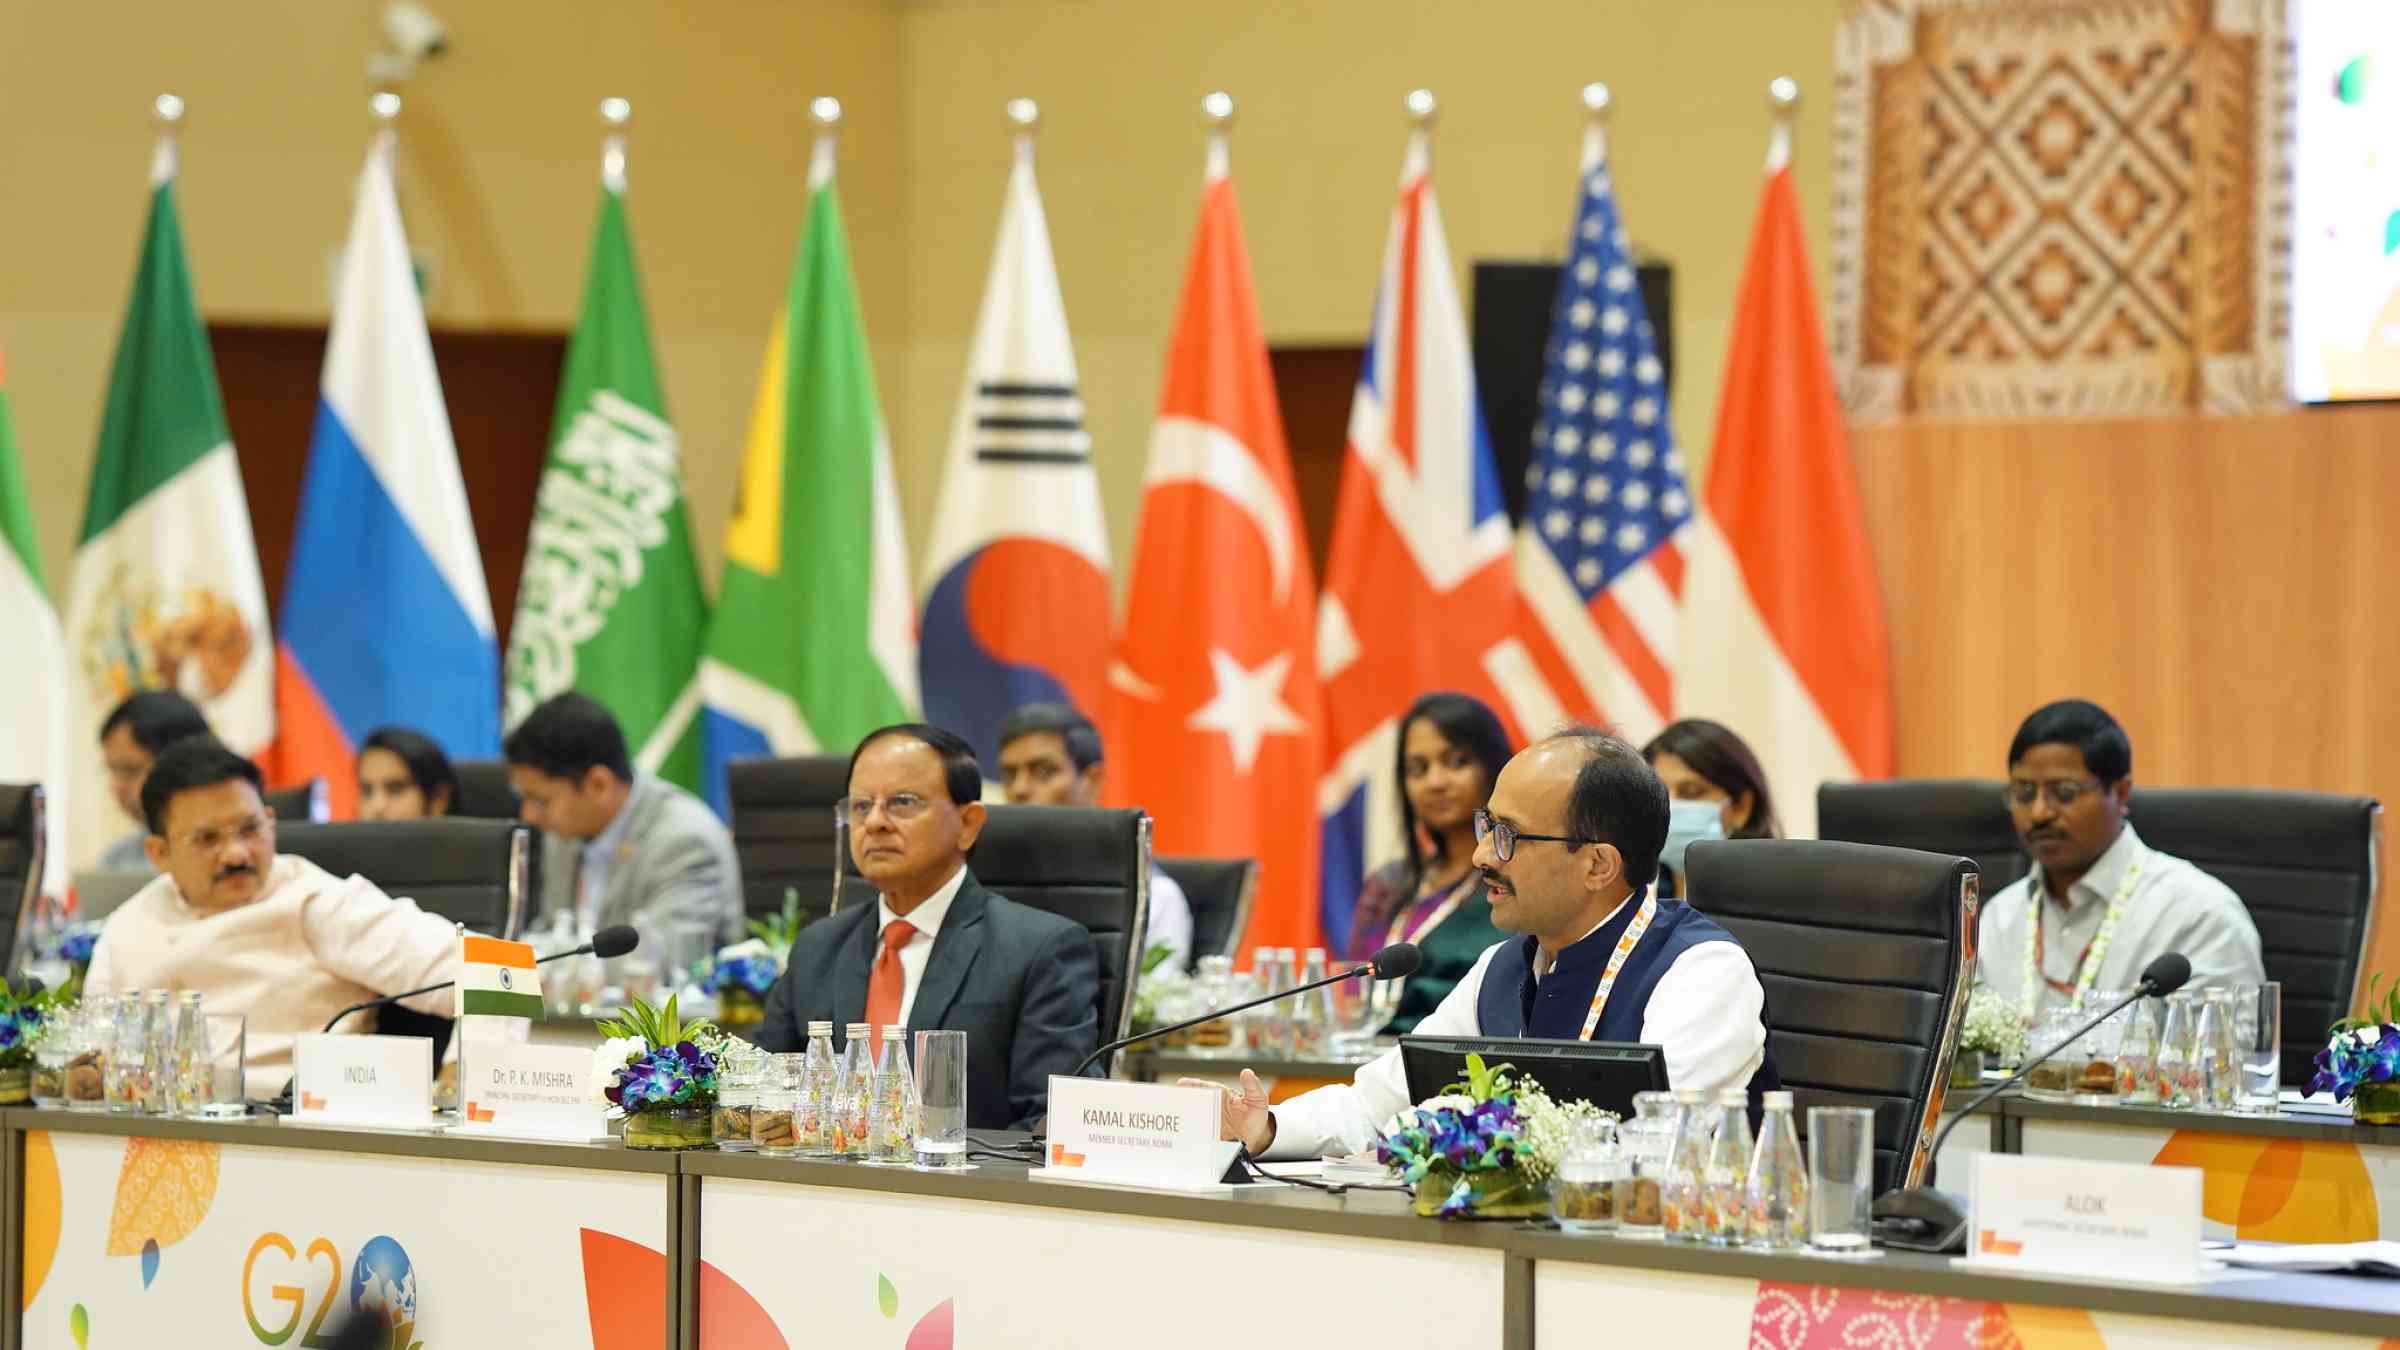 Delegates at the G20DRRWG Inaugural Session 